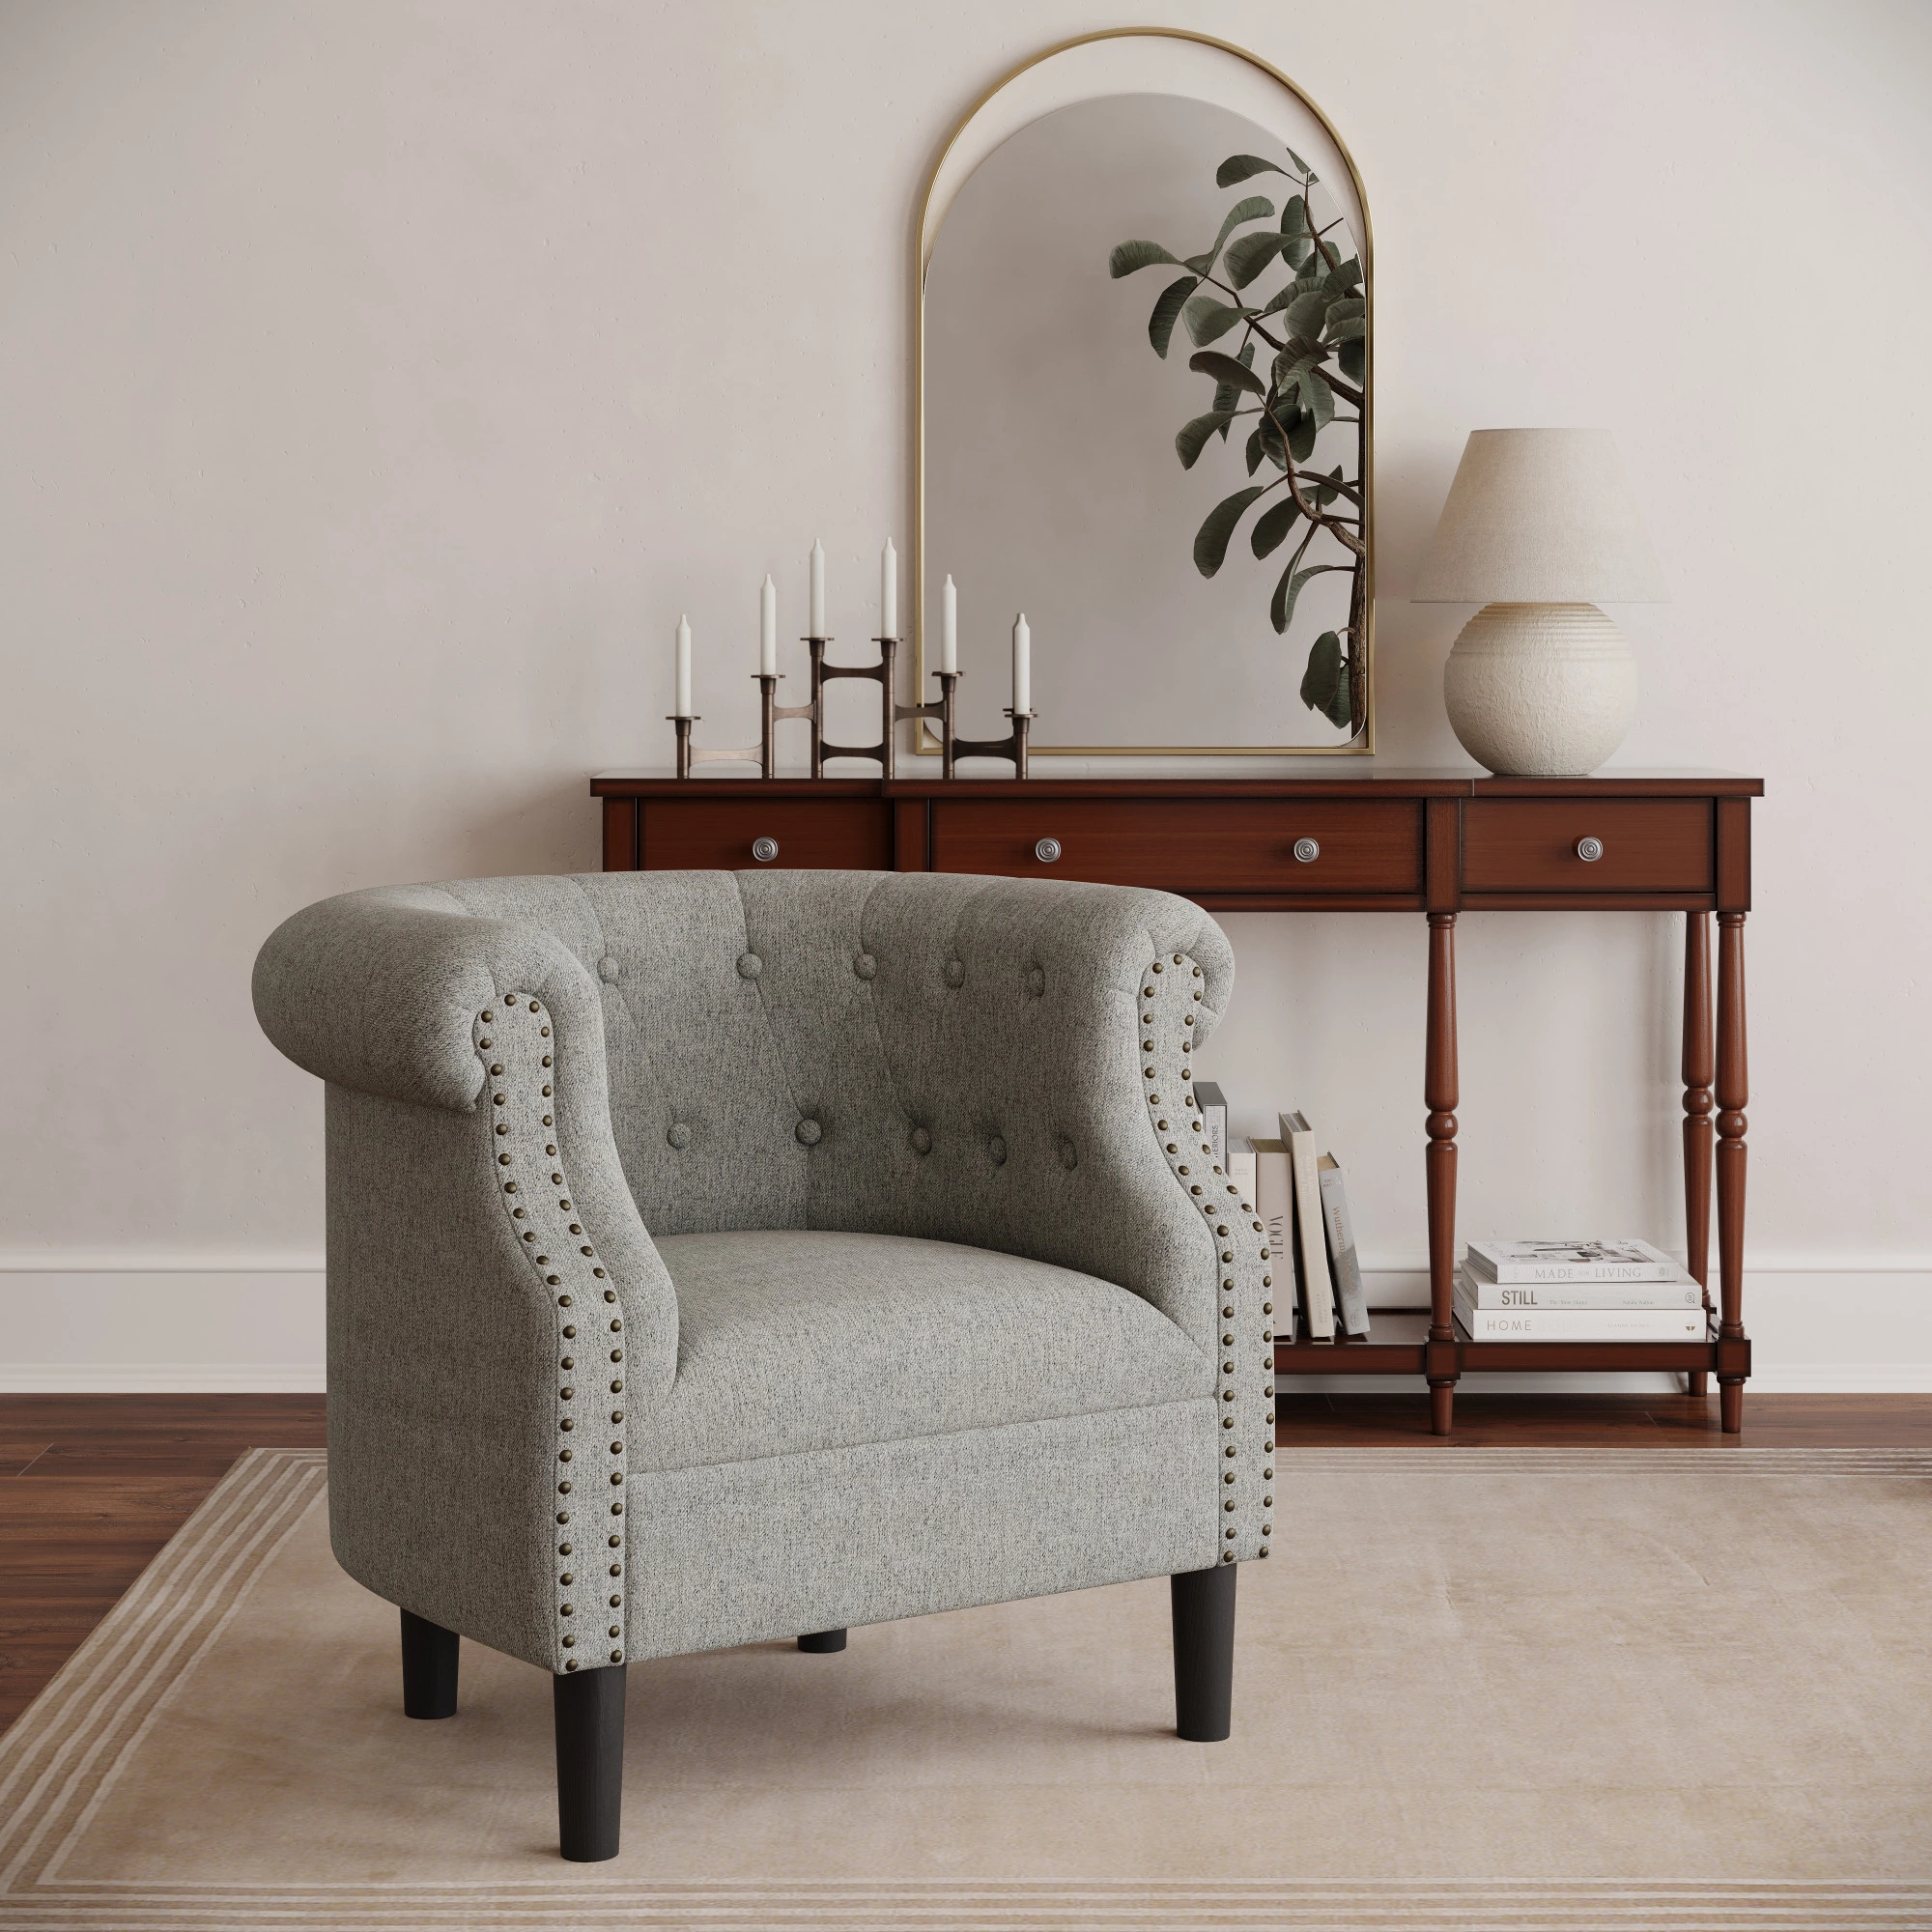 https://www.homethreads.com/files/jofran/lily-ch-ash-lily-transitional-contemporary-upholstered-barrel-curved-back-accent-chair-with-nailhead-trim-7.webp